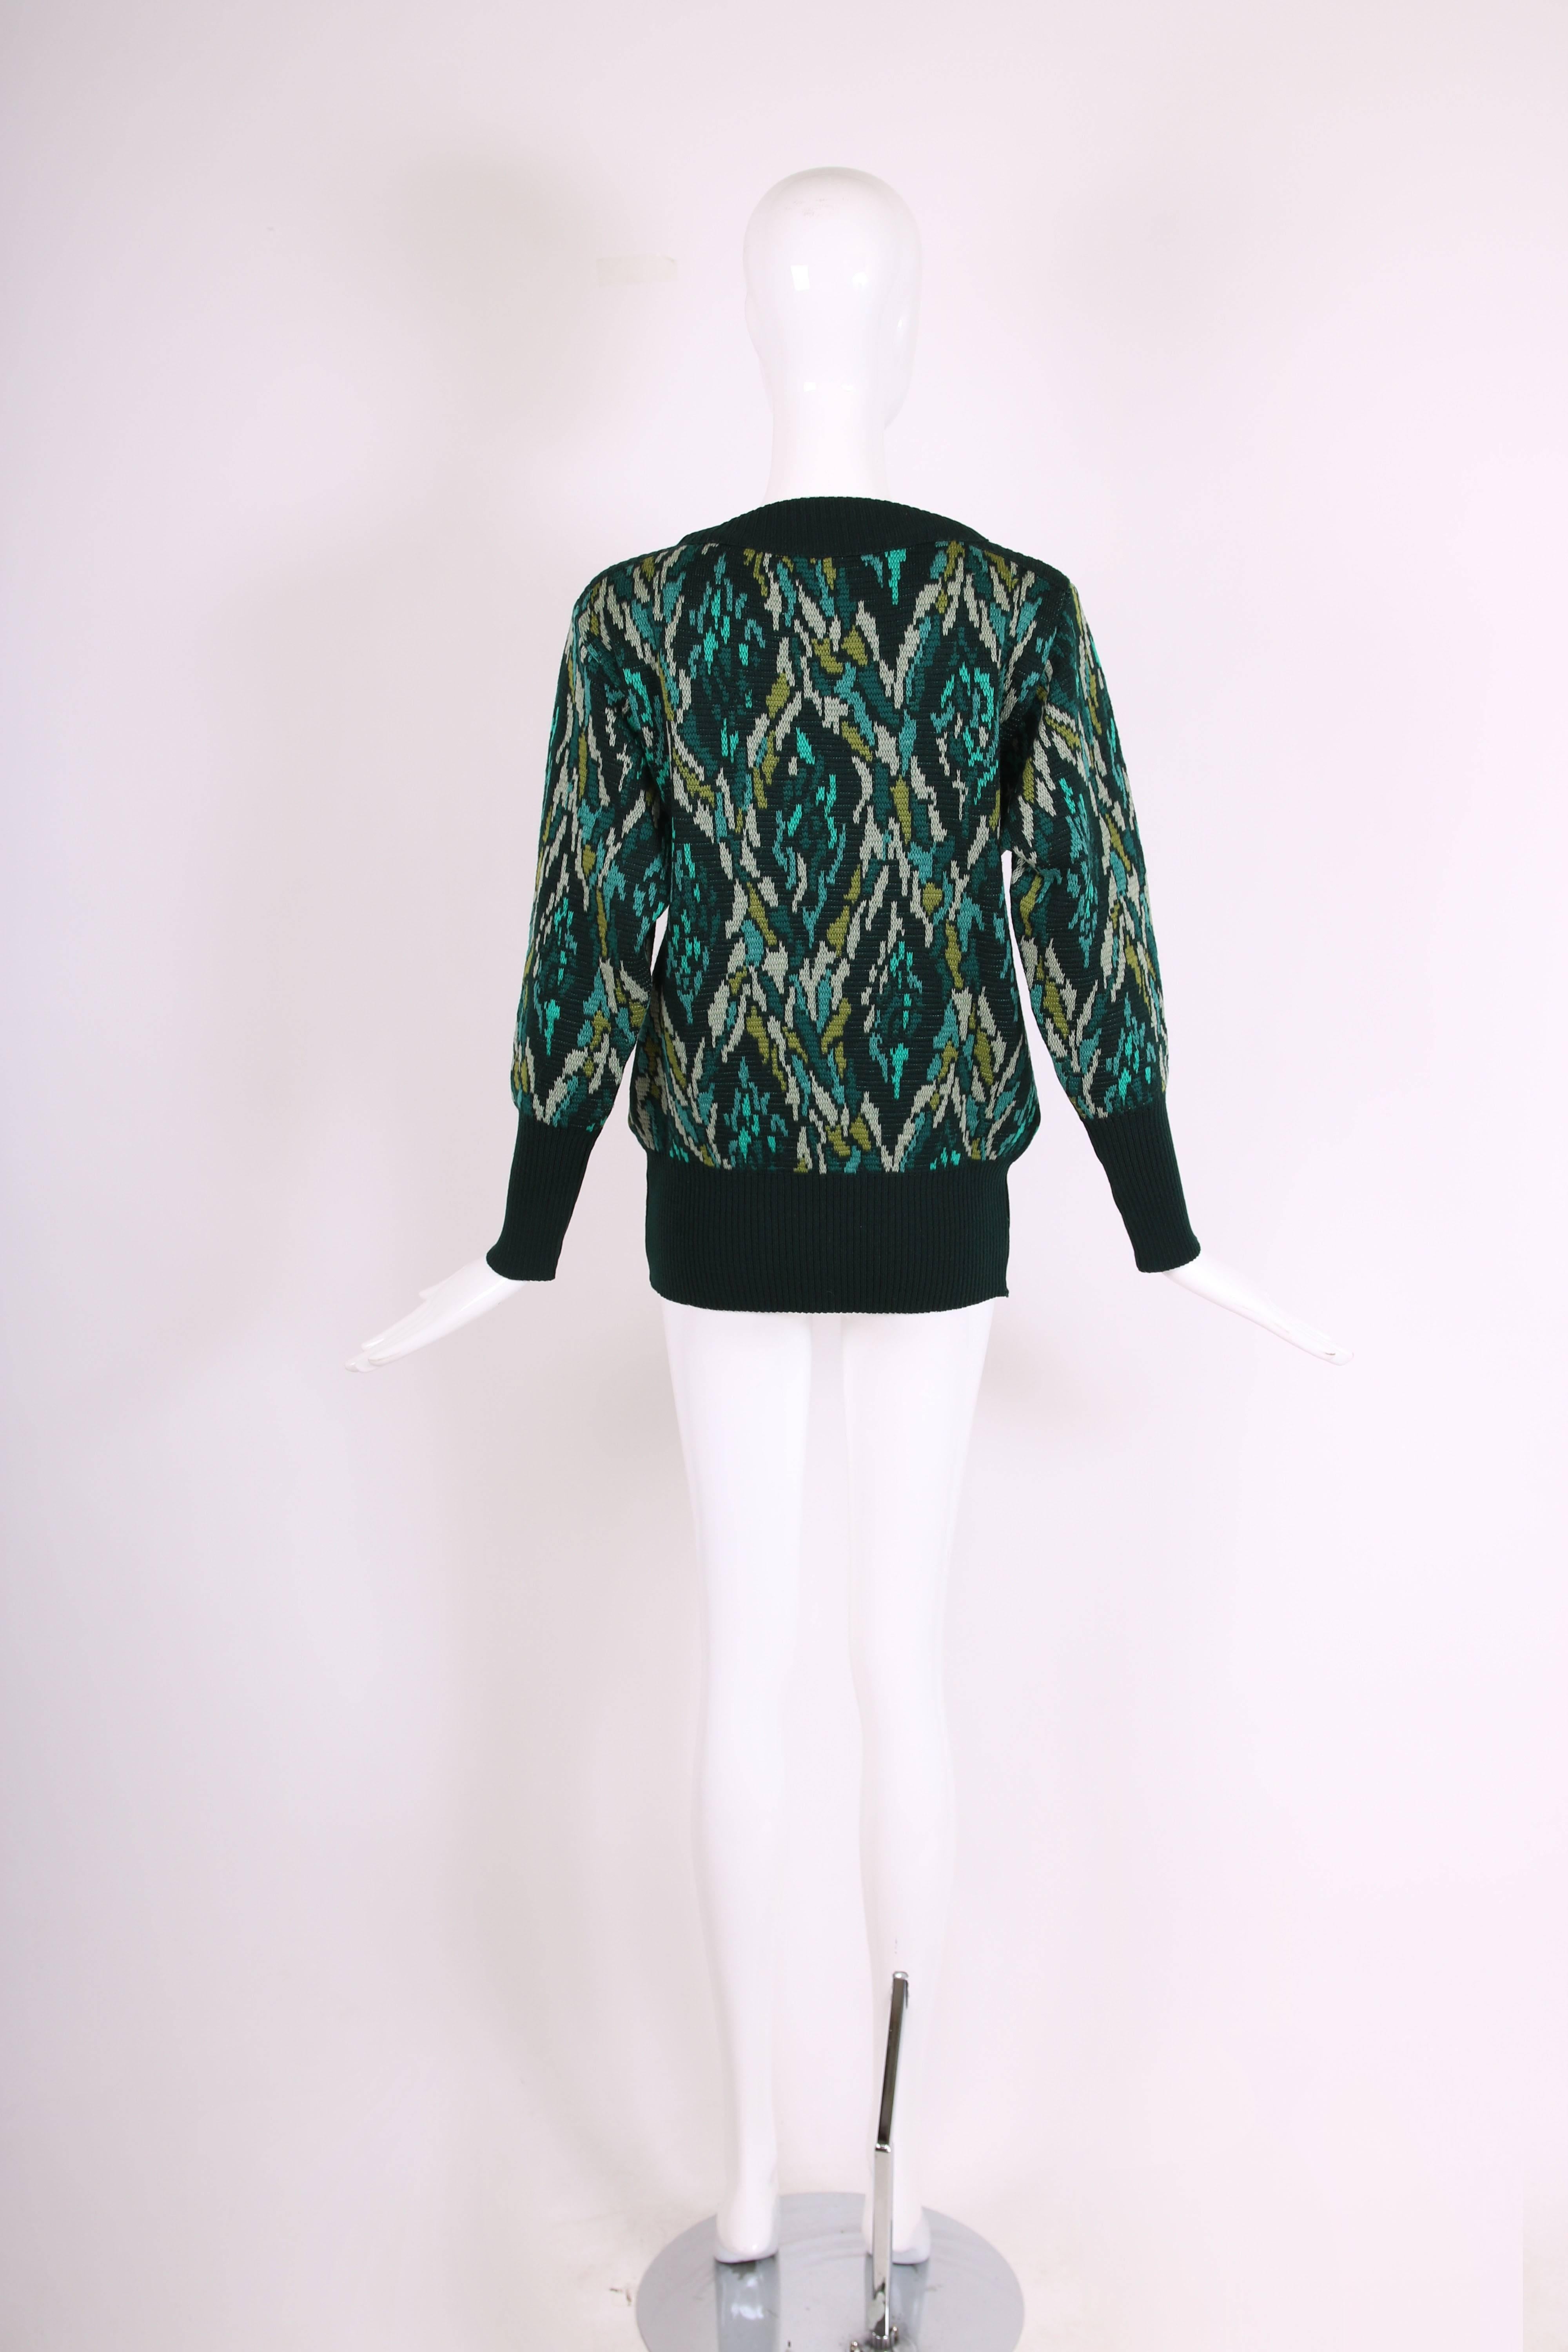 Women's Yves Saint Laurent Vintage Multi-Colored Abstract Pattern Sweater